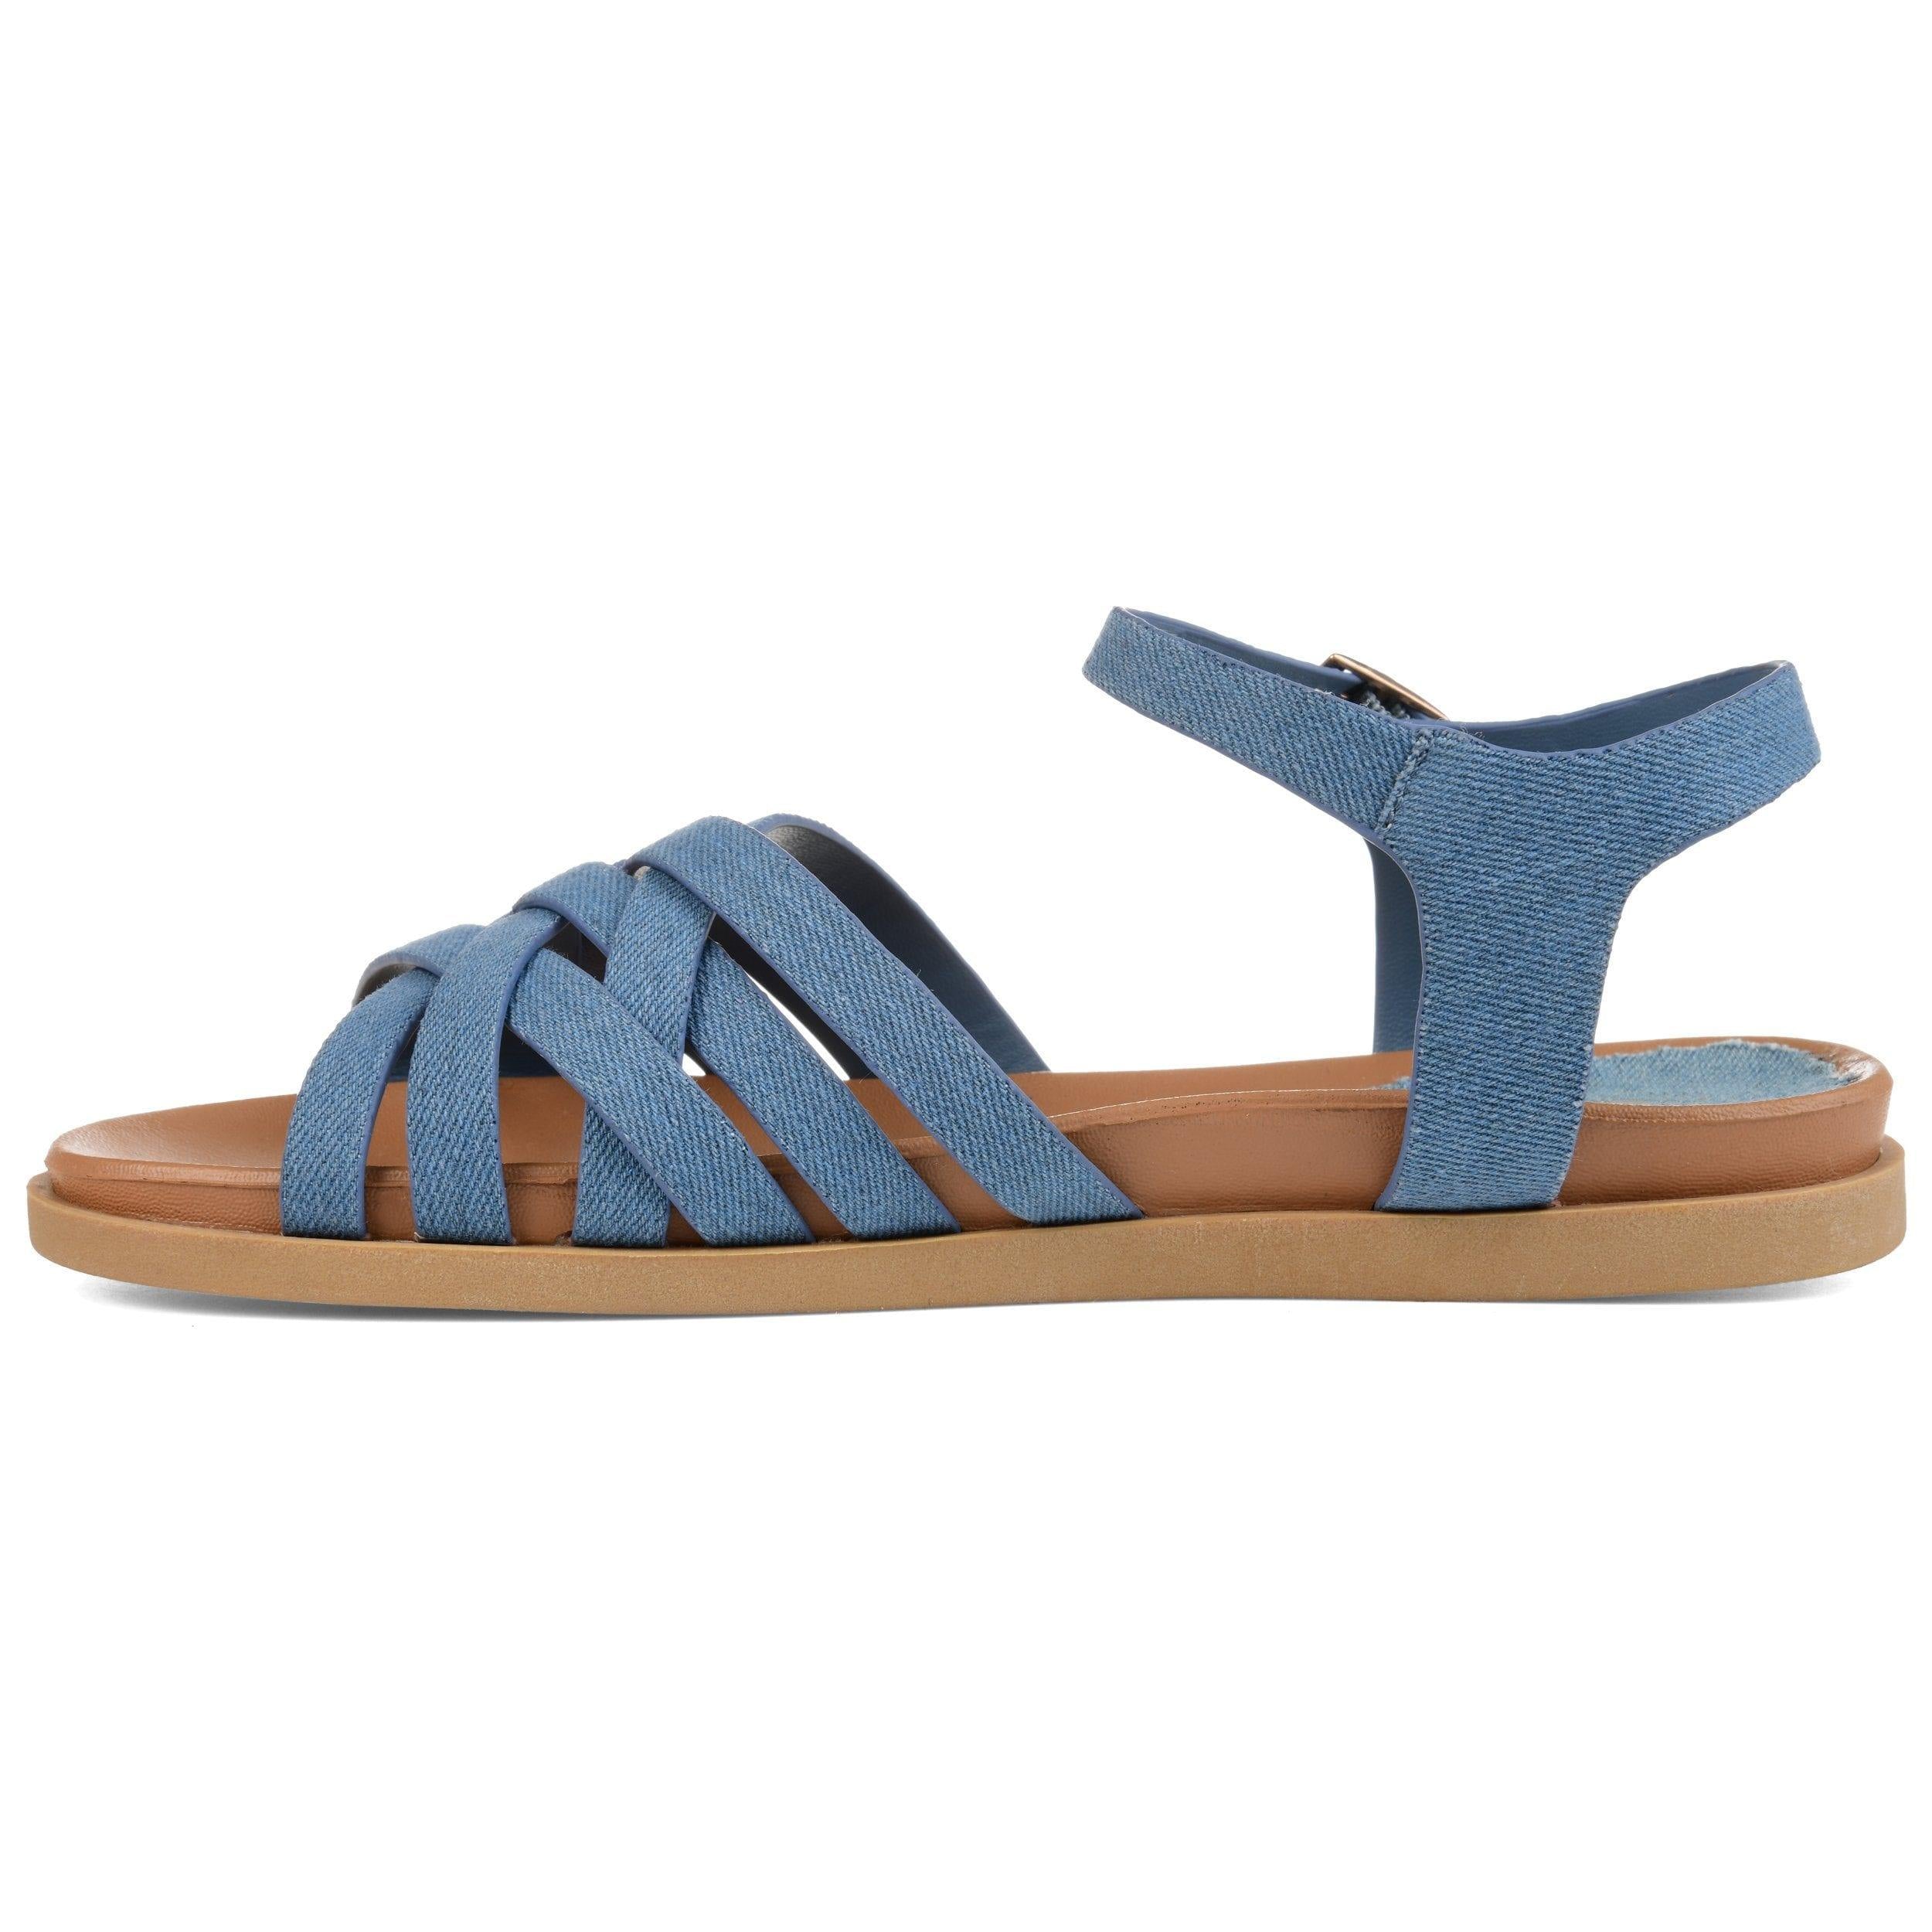 Kimmie Sandal | Women's Strappy Sandal | Journee Collection